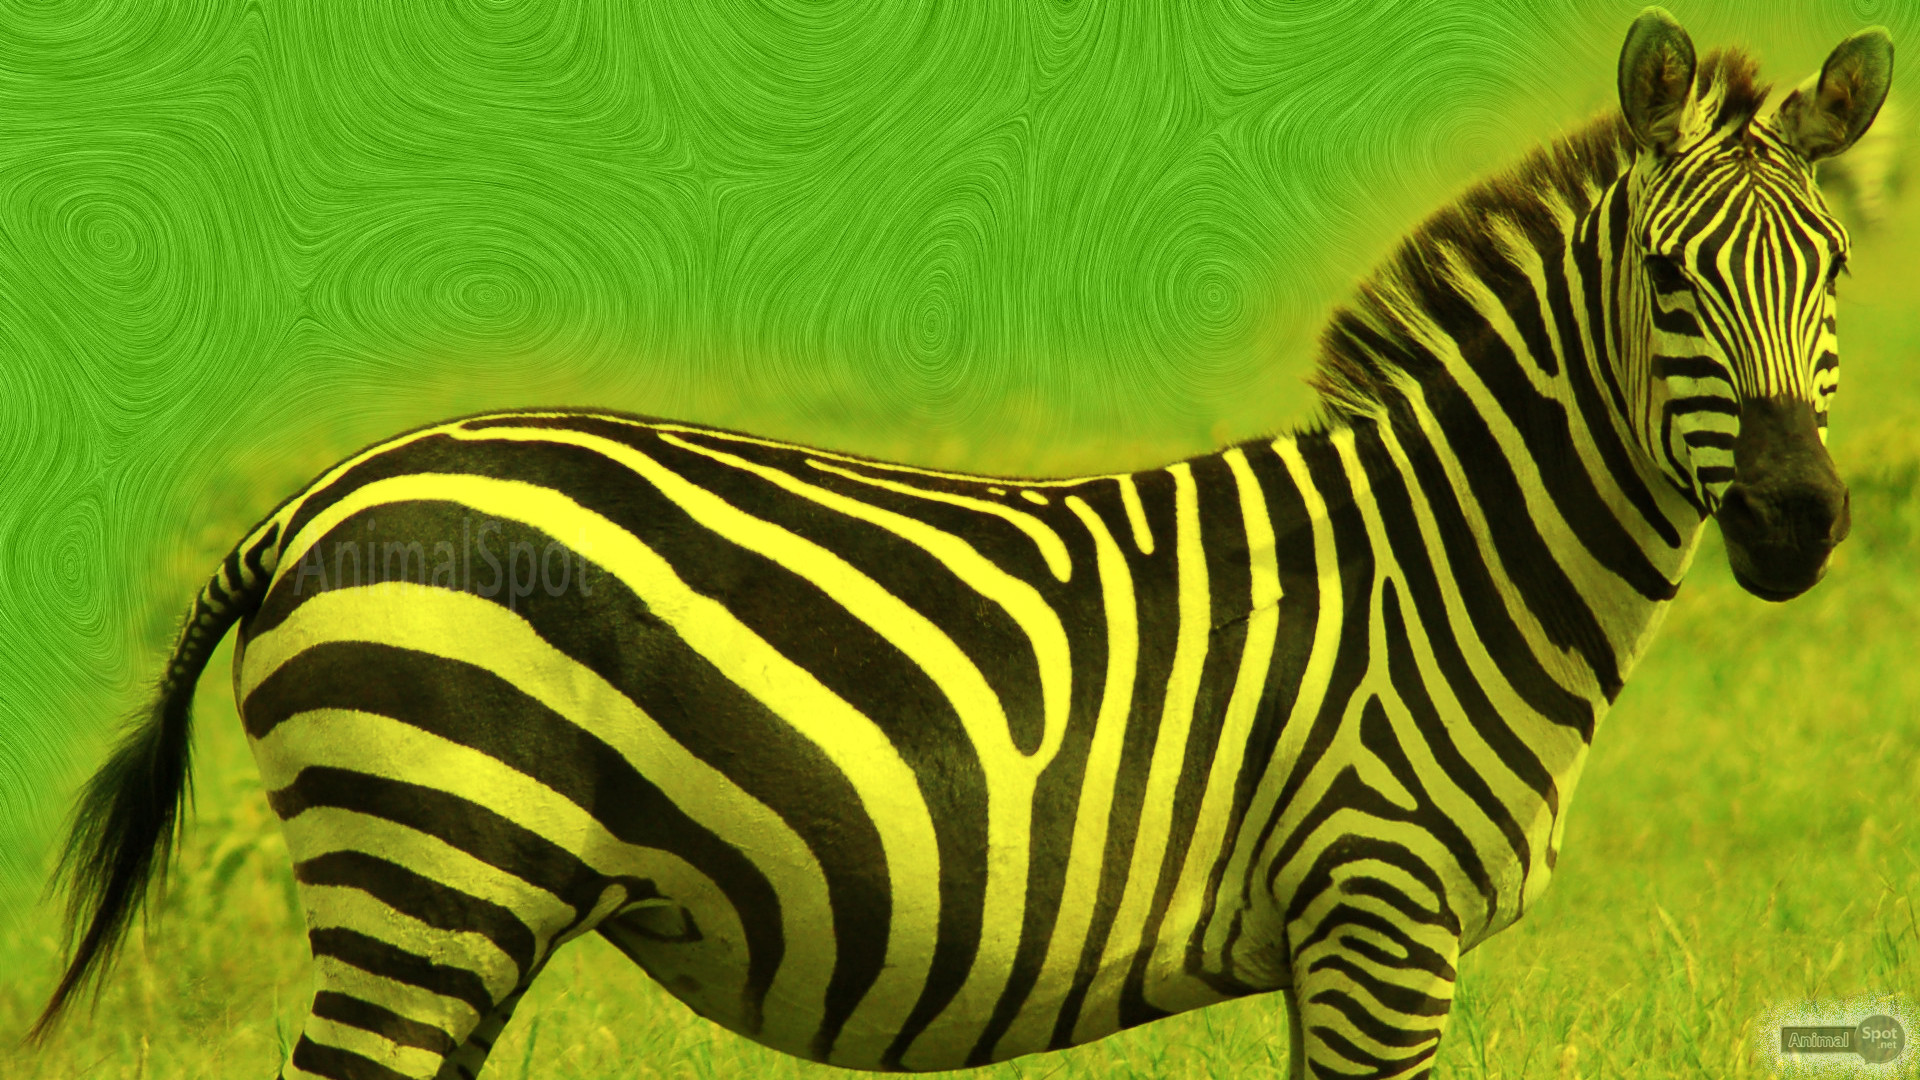 1920x1080 Best Zebra Wallpapers and Backgrounds